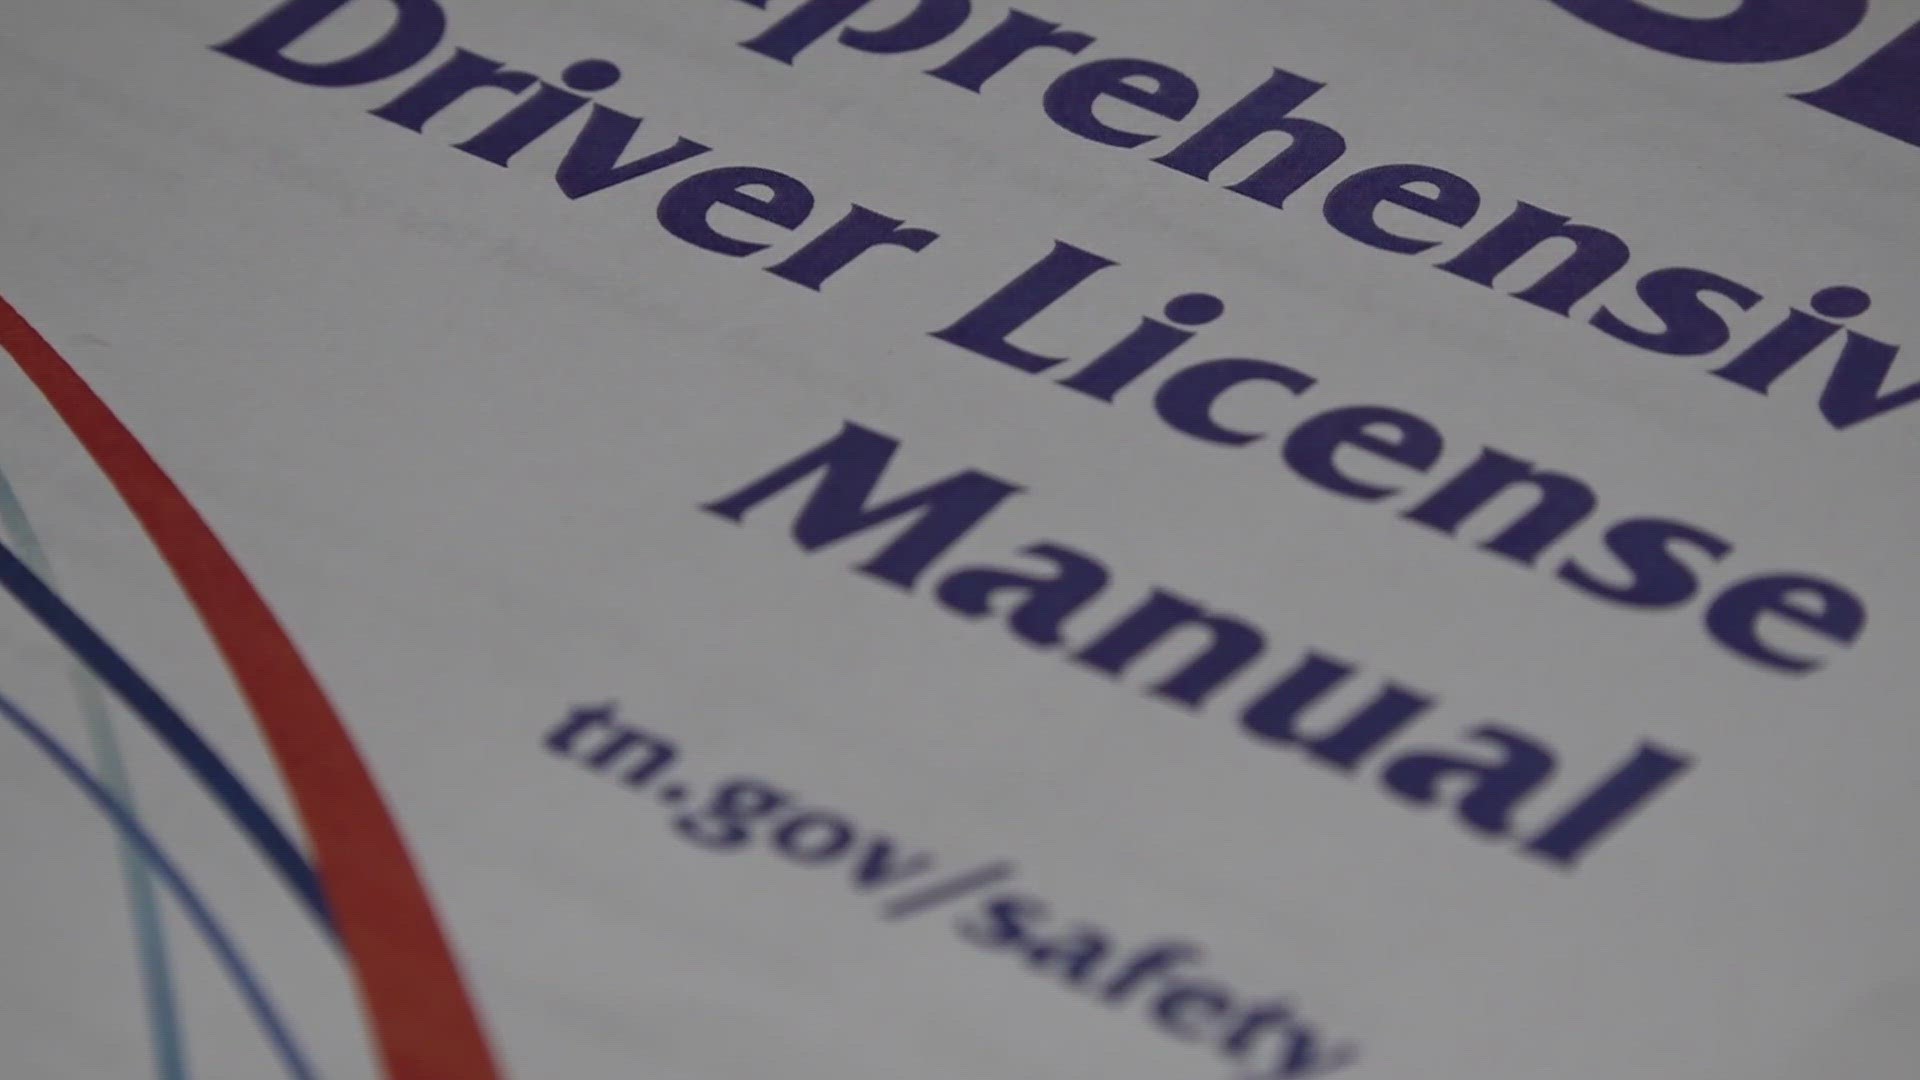 The Tennessee driver's license knowledge exam is offered in five languages. A lawmaker has proposed legislation to strip the list of languages back to English only.